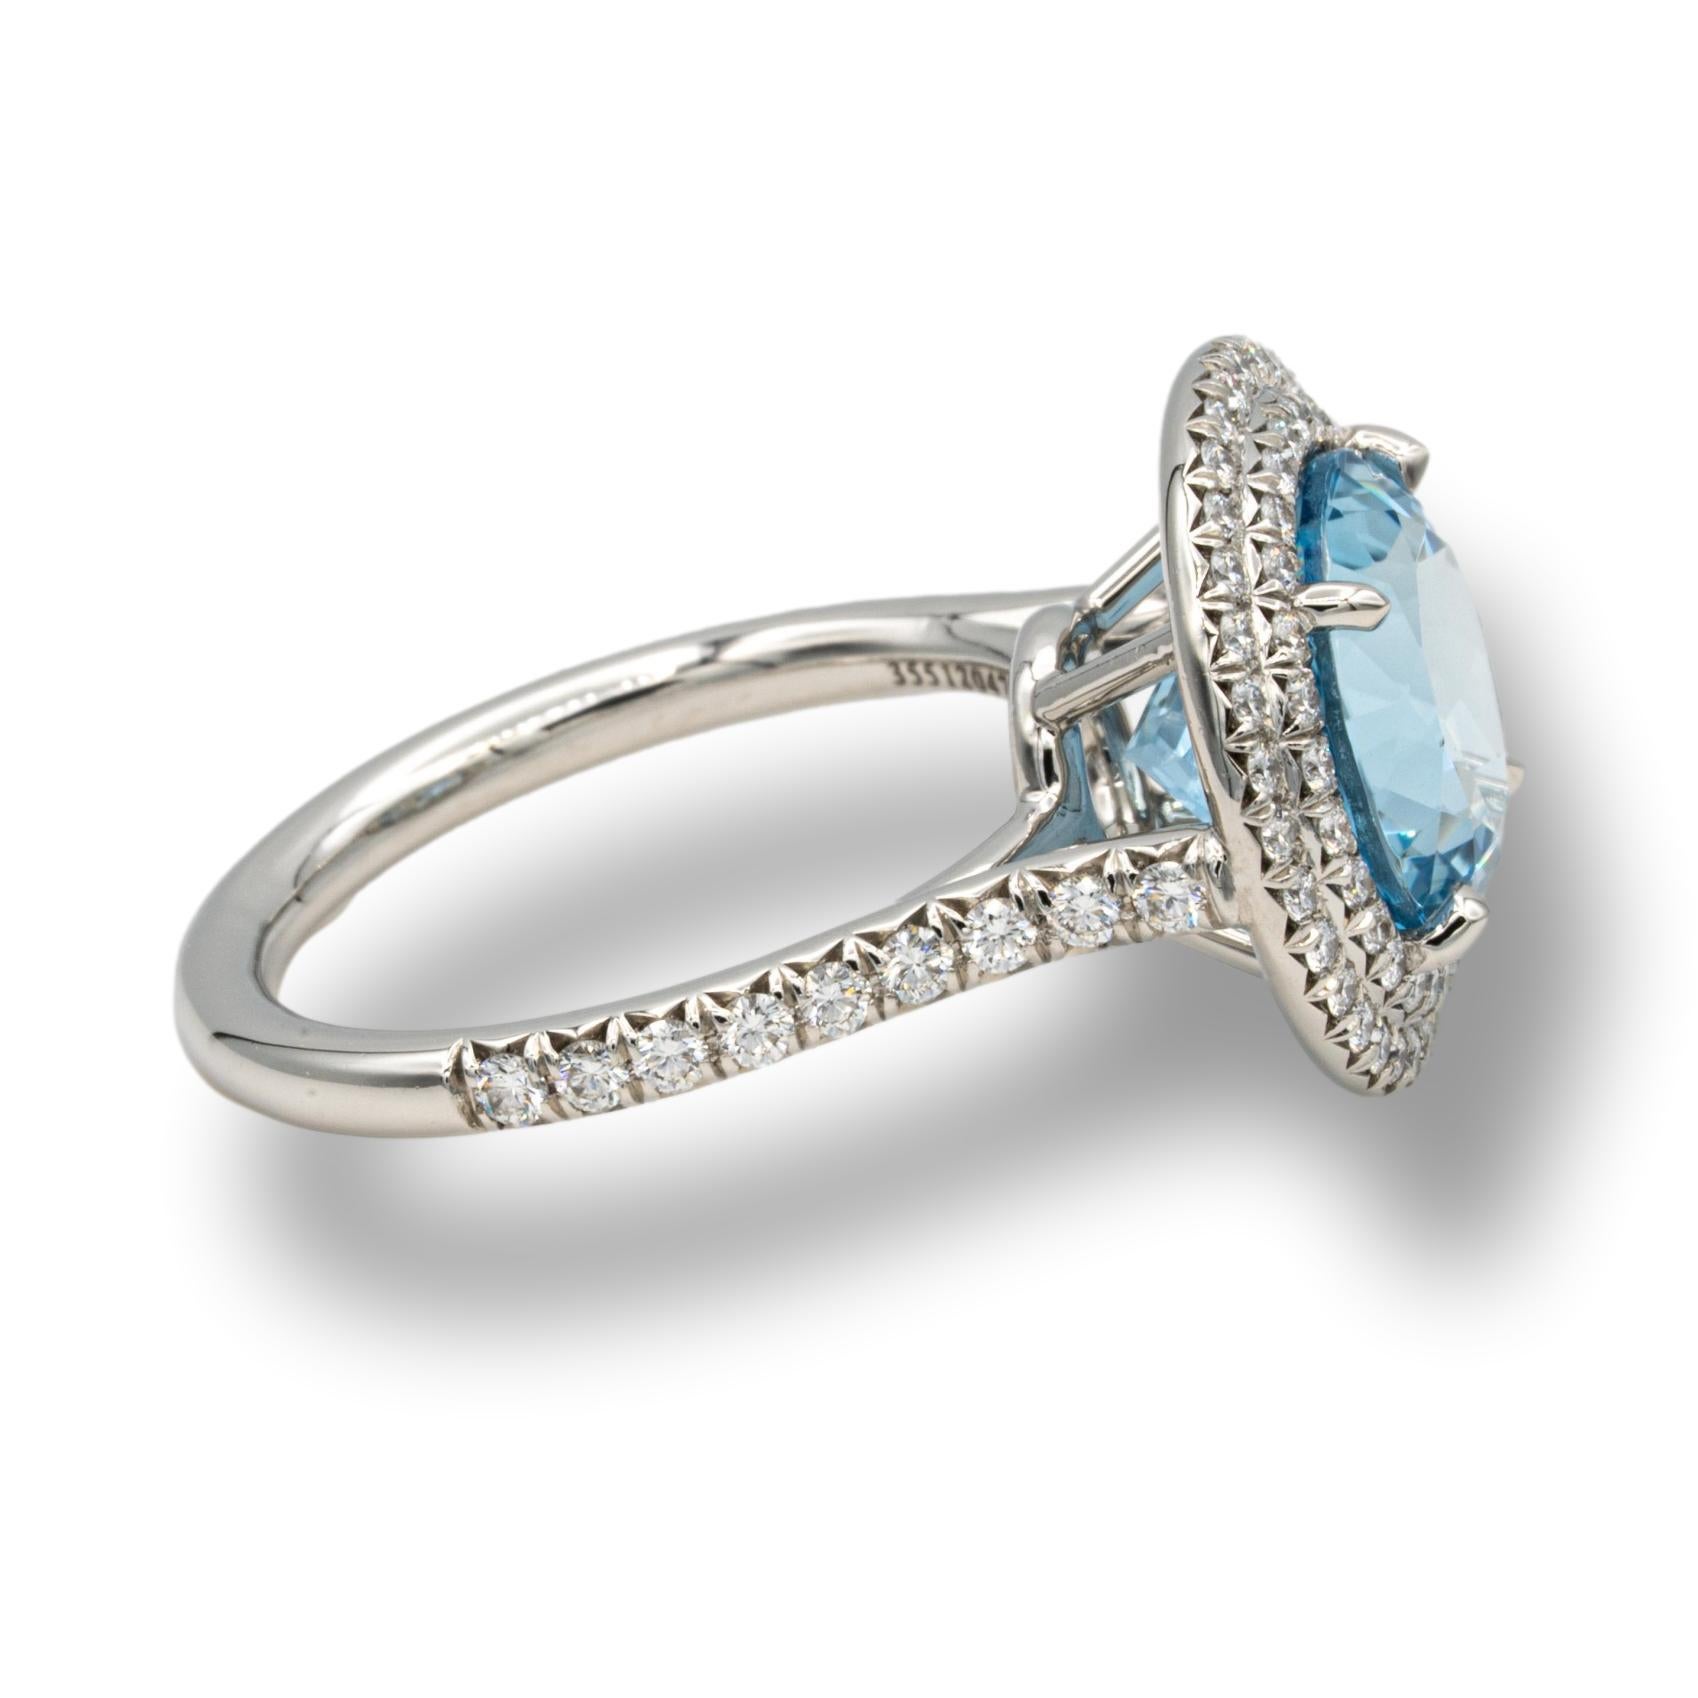 Tiffany & Co. double Soleste aquamarine and diamond ring finely crafted in platinum with a round brilliant cut deep blue color aquamarine weighing 5.00 carats approximately , surrounded by a double row of round brilliant cut bead set diamonds